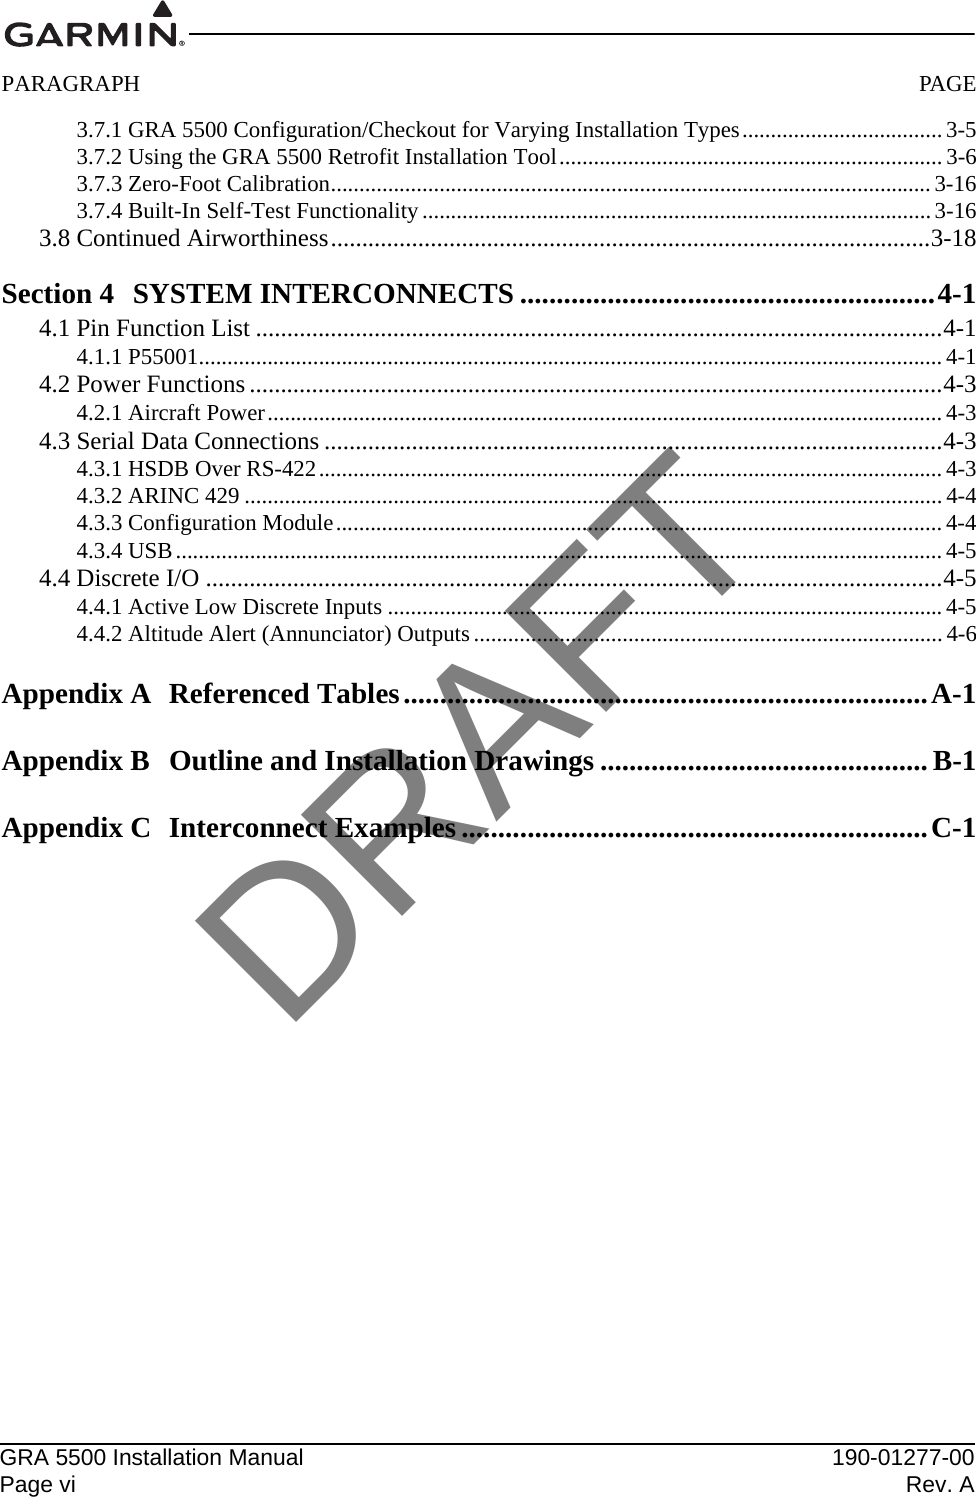 GRA 5500 Installation Manual 190-01277-00Page vi Rev. APARAGRAPH PAGE3.7.1 GRA 5500 Configuration/Checkout for Varying Installation Types...................................3-53.7.2 Using the GRA 5500 Retrofit Installation Tool...................................................................3-63.7.3 Zero-Foot Calibration.........................................................................................................3-163.7.4 Built-In Self-Test Functionality.........................................................................................3-163.8 Continued Airworthiness................................................................................................3-18Section 4 SYSTEM INTERCONNECTS .........................................................4-14.1 Pin Function List ..............................................................................................................4-14.1.1 P55001..................................................................................................................................4-14.2 Power Functions ...............................................................................................................4-34.2.1 Aircraft Power......................................................................................................................4-34.3 Serial Data Connections ...................................................................................................4-34.3.1 HSDB Over RS-422.............................................................................................................4-34.3.2 ARINC 429 ..........................................................................................................................4-44.3.3 Configuration Module..........................................................................................................4-44.3.4 USB......................................................................................................................................4-54.4 Discrete I/O ......................................................................................................................4-54.4.1 Active Low Discrete Inputs .................................................................................................4-54.4.2 Altitude Alert (Annunciator) Outputs..................................................................................4-6Appendix A Referenced Tables........................................................................A-1Appendix B Outline and Installation Drawings ............................................. B-1Appendix C Interconnect Examples ................................................................C-1DRAFT